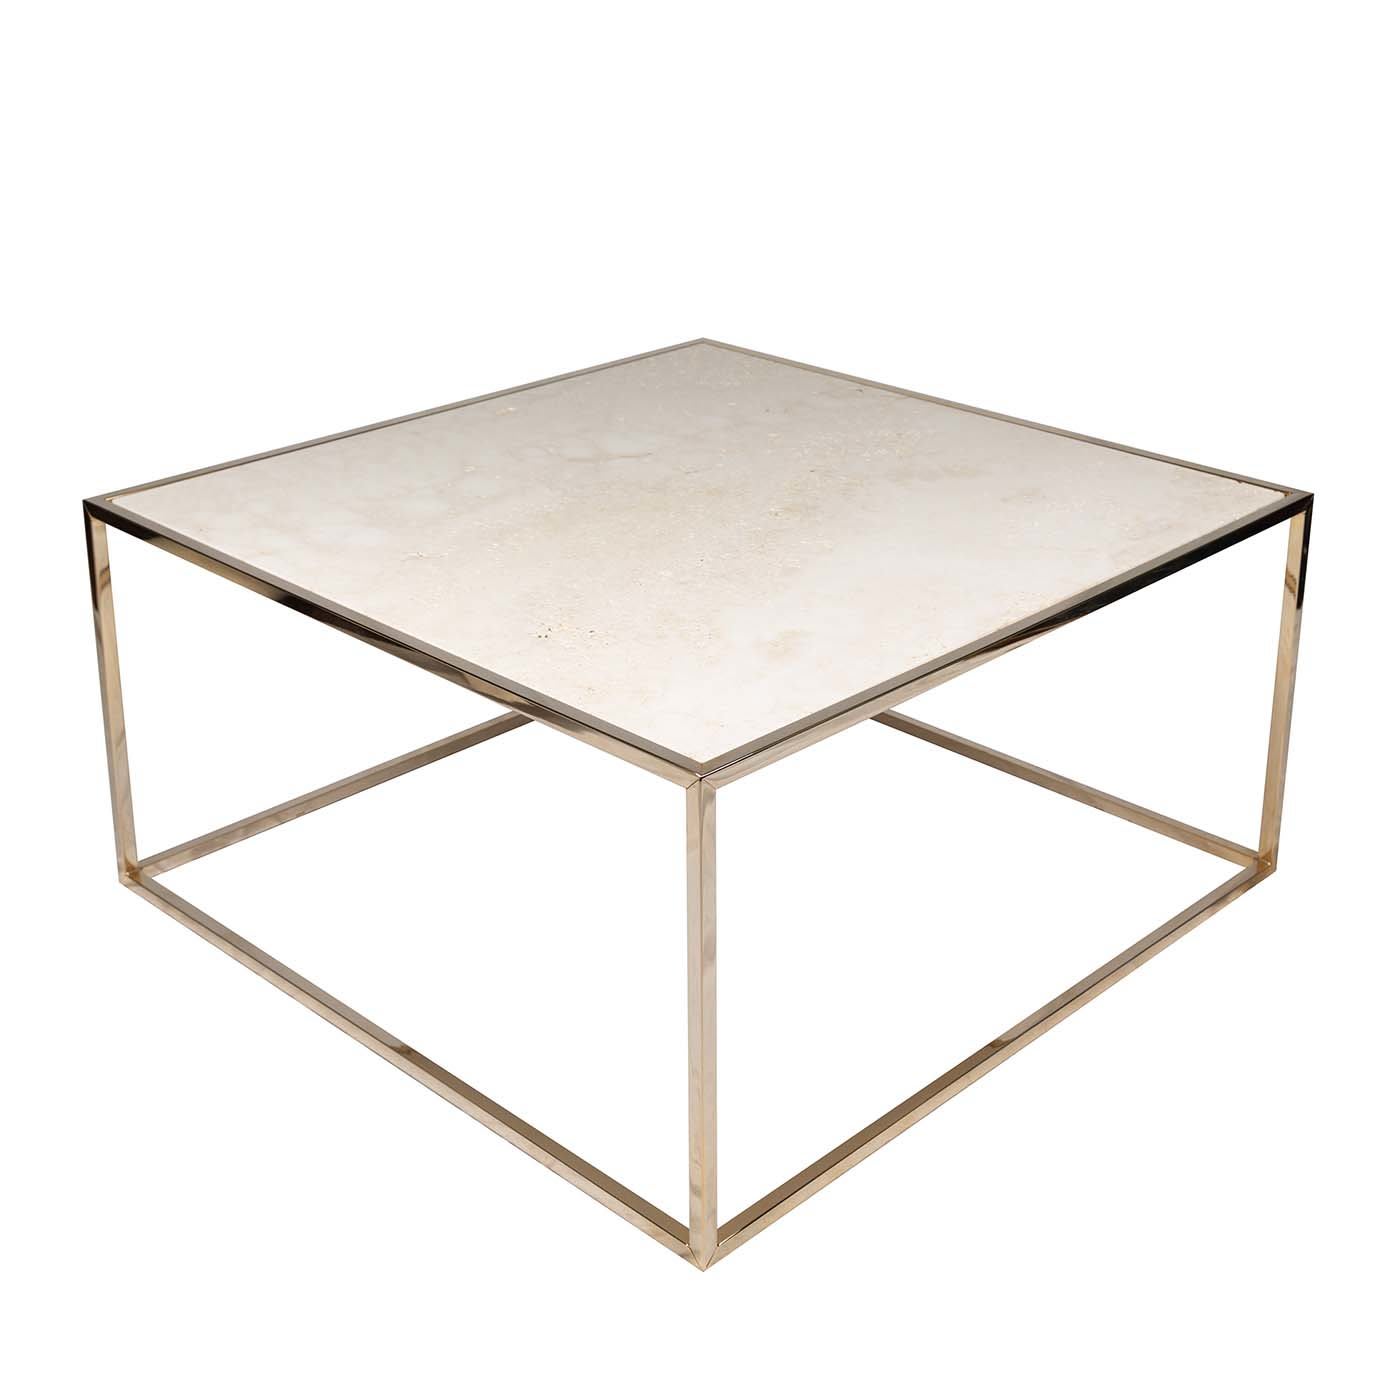 Square 78 coffee table with gold finish - Cube3